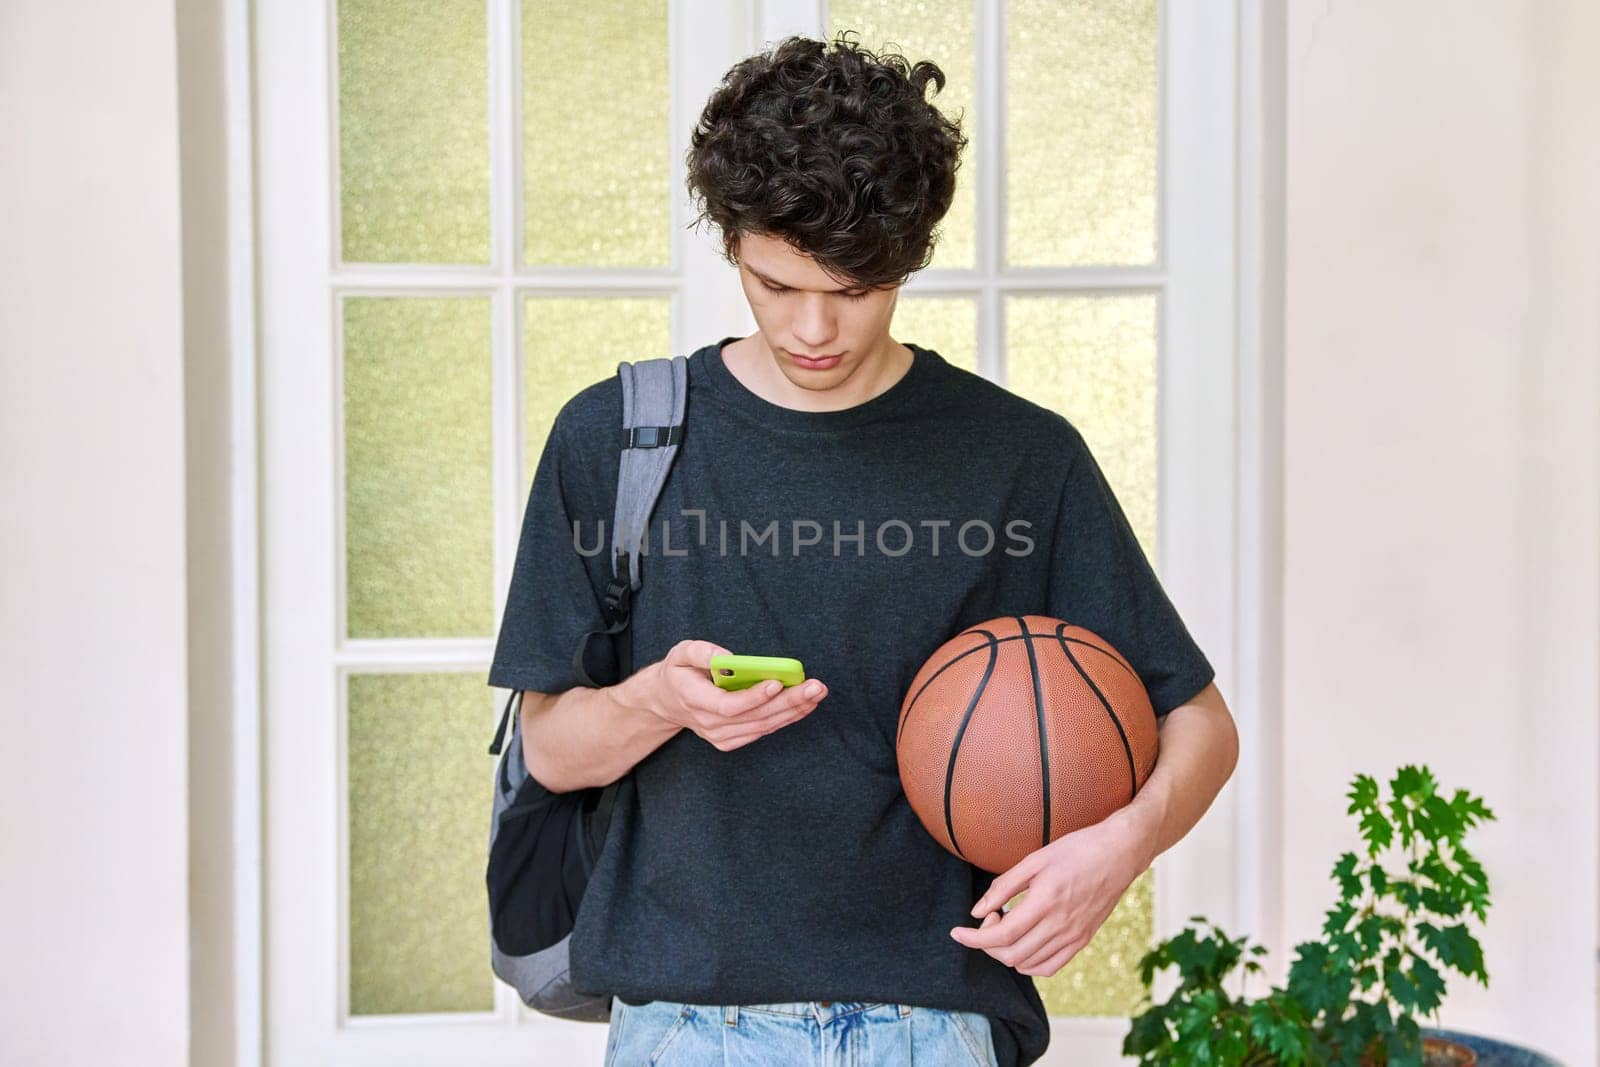 Portrait of young male with backpack, basketball and smartphone. Handsome curly 19, 20 year old teen student using texting mobile phone inside college. Lifestyle, youth concept